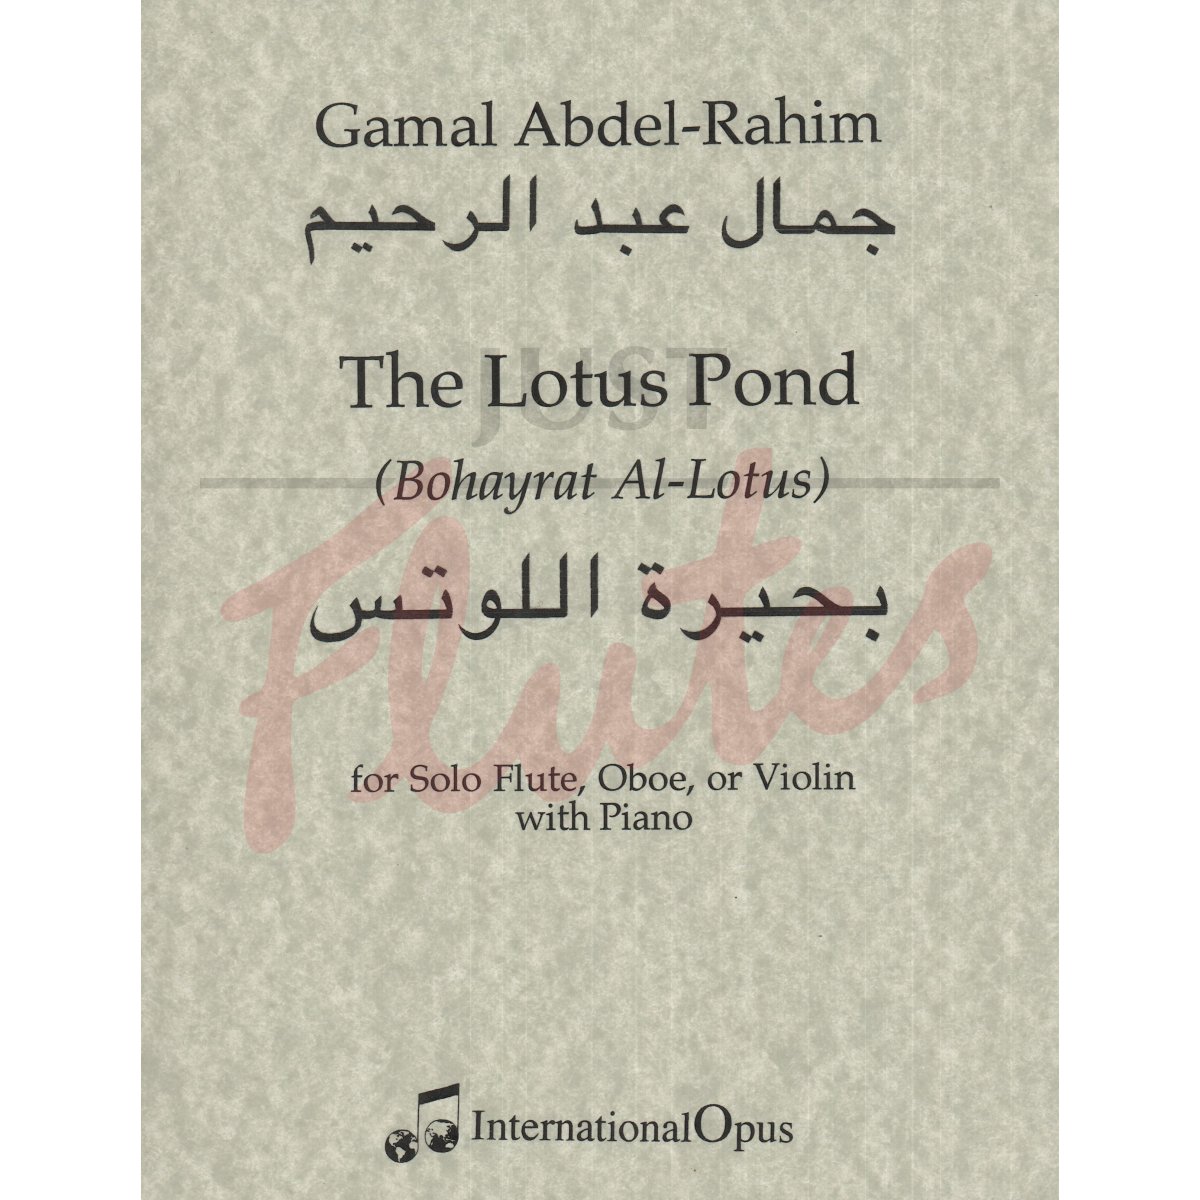 The Lotus Pond for Oboe/Flute/Violin and Piano